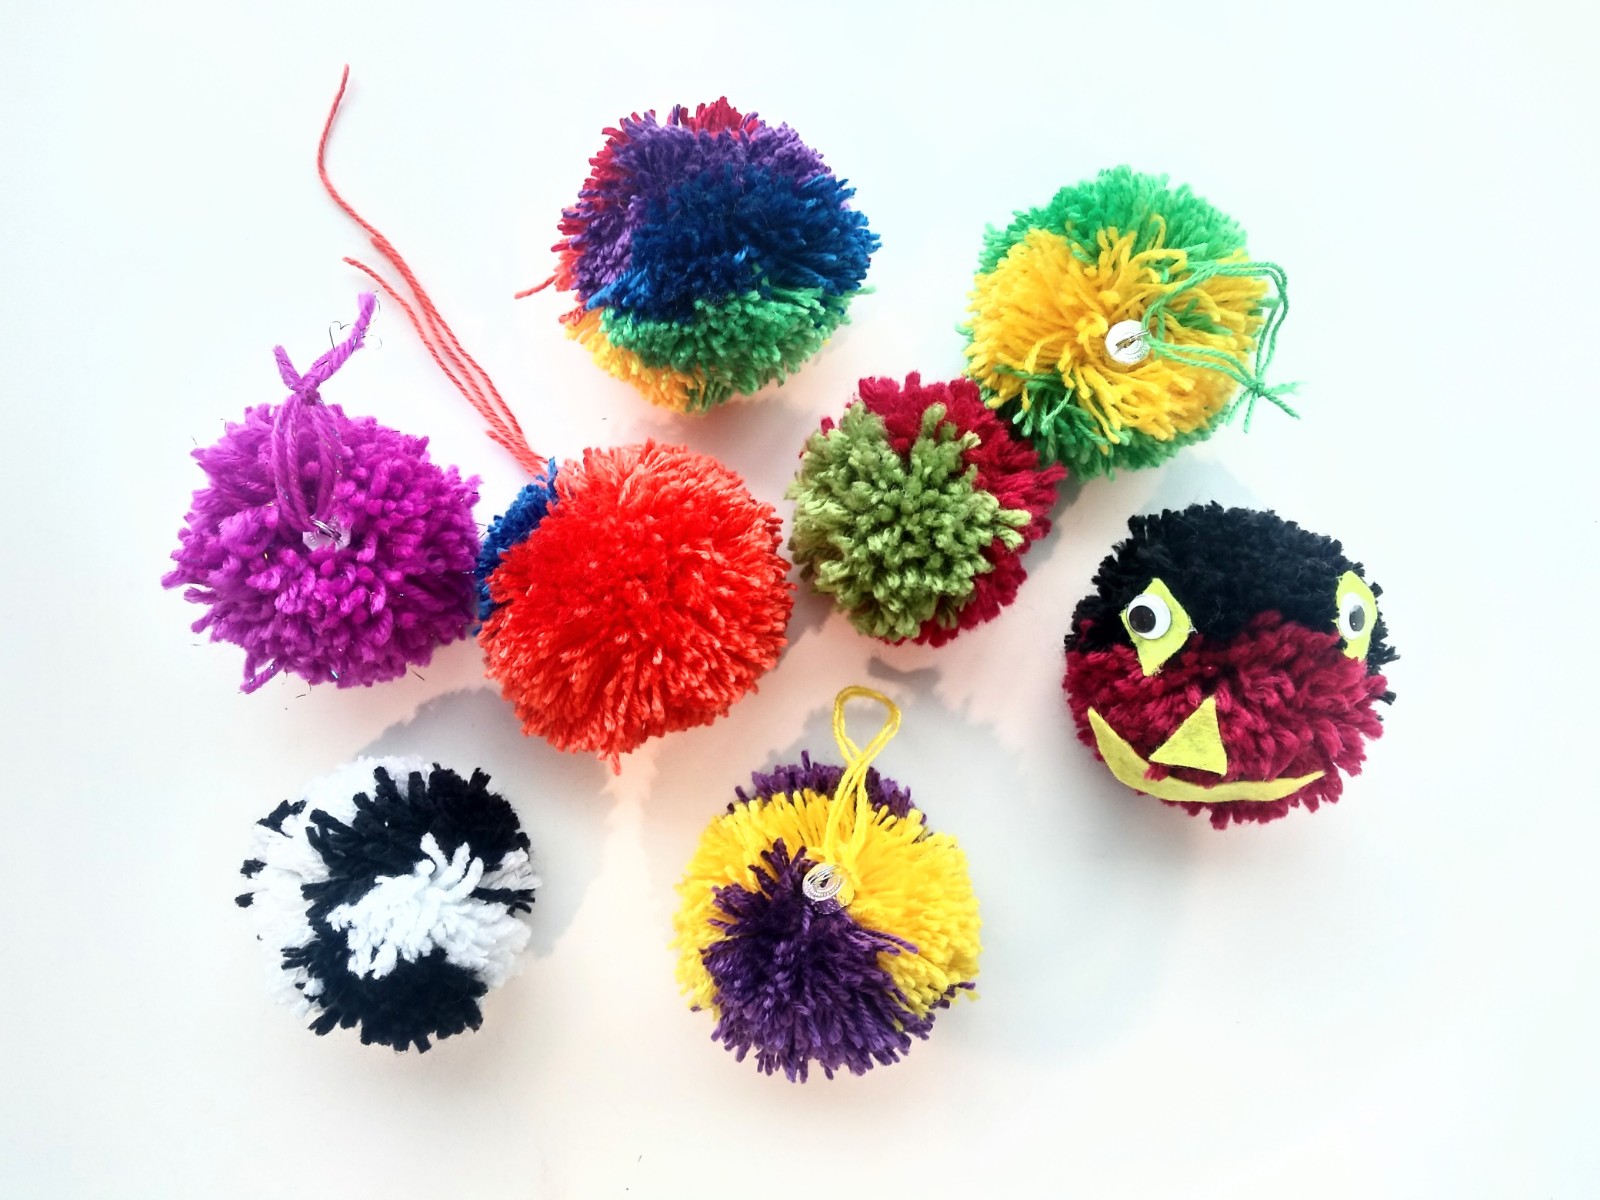 8 yarn pompoms that also have ornament tops on most of them.